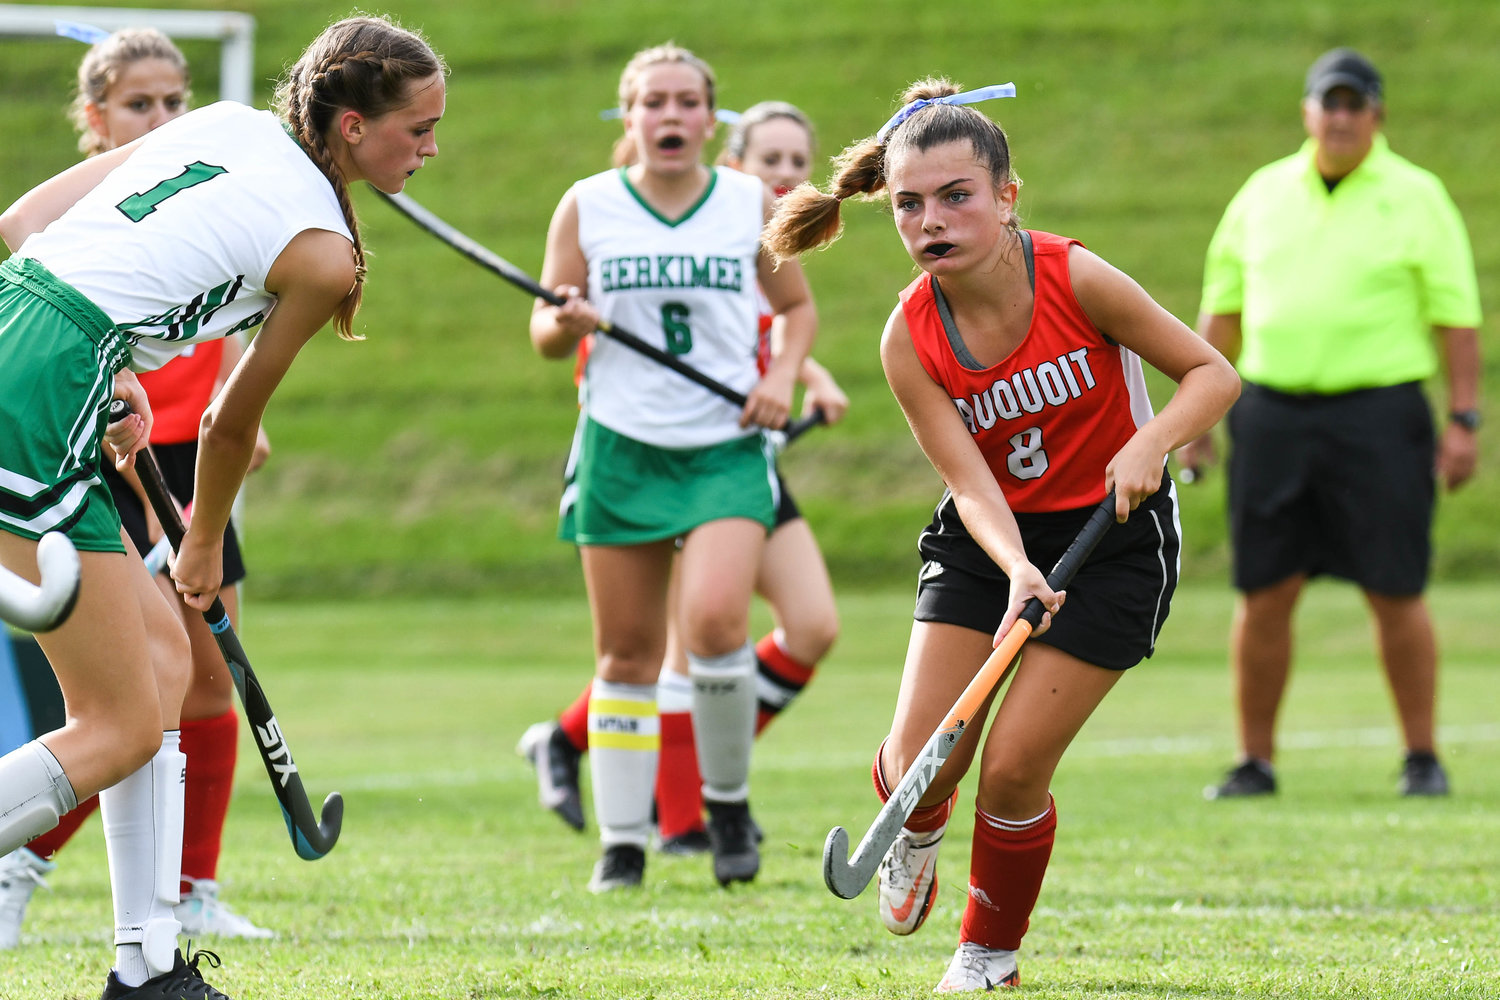 Sauquoit Valley’s Isabella Canarelli (8) moves the ball against Herkimer defender Sydney Bell (1) during the Center State Conference field hockey game on Monday in Herkimer. Sauquoit Valley is 2-1-1 and Herkimer is 0-2-1.